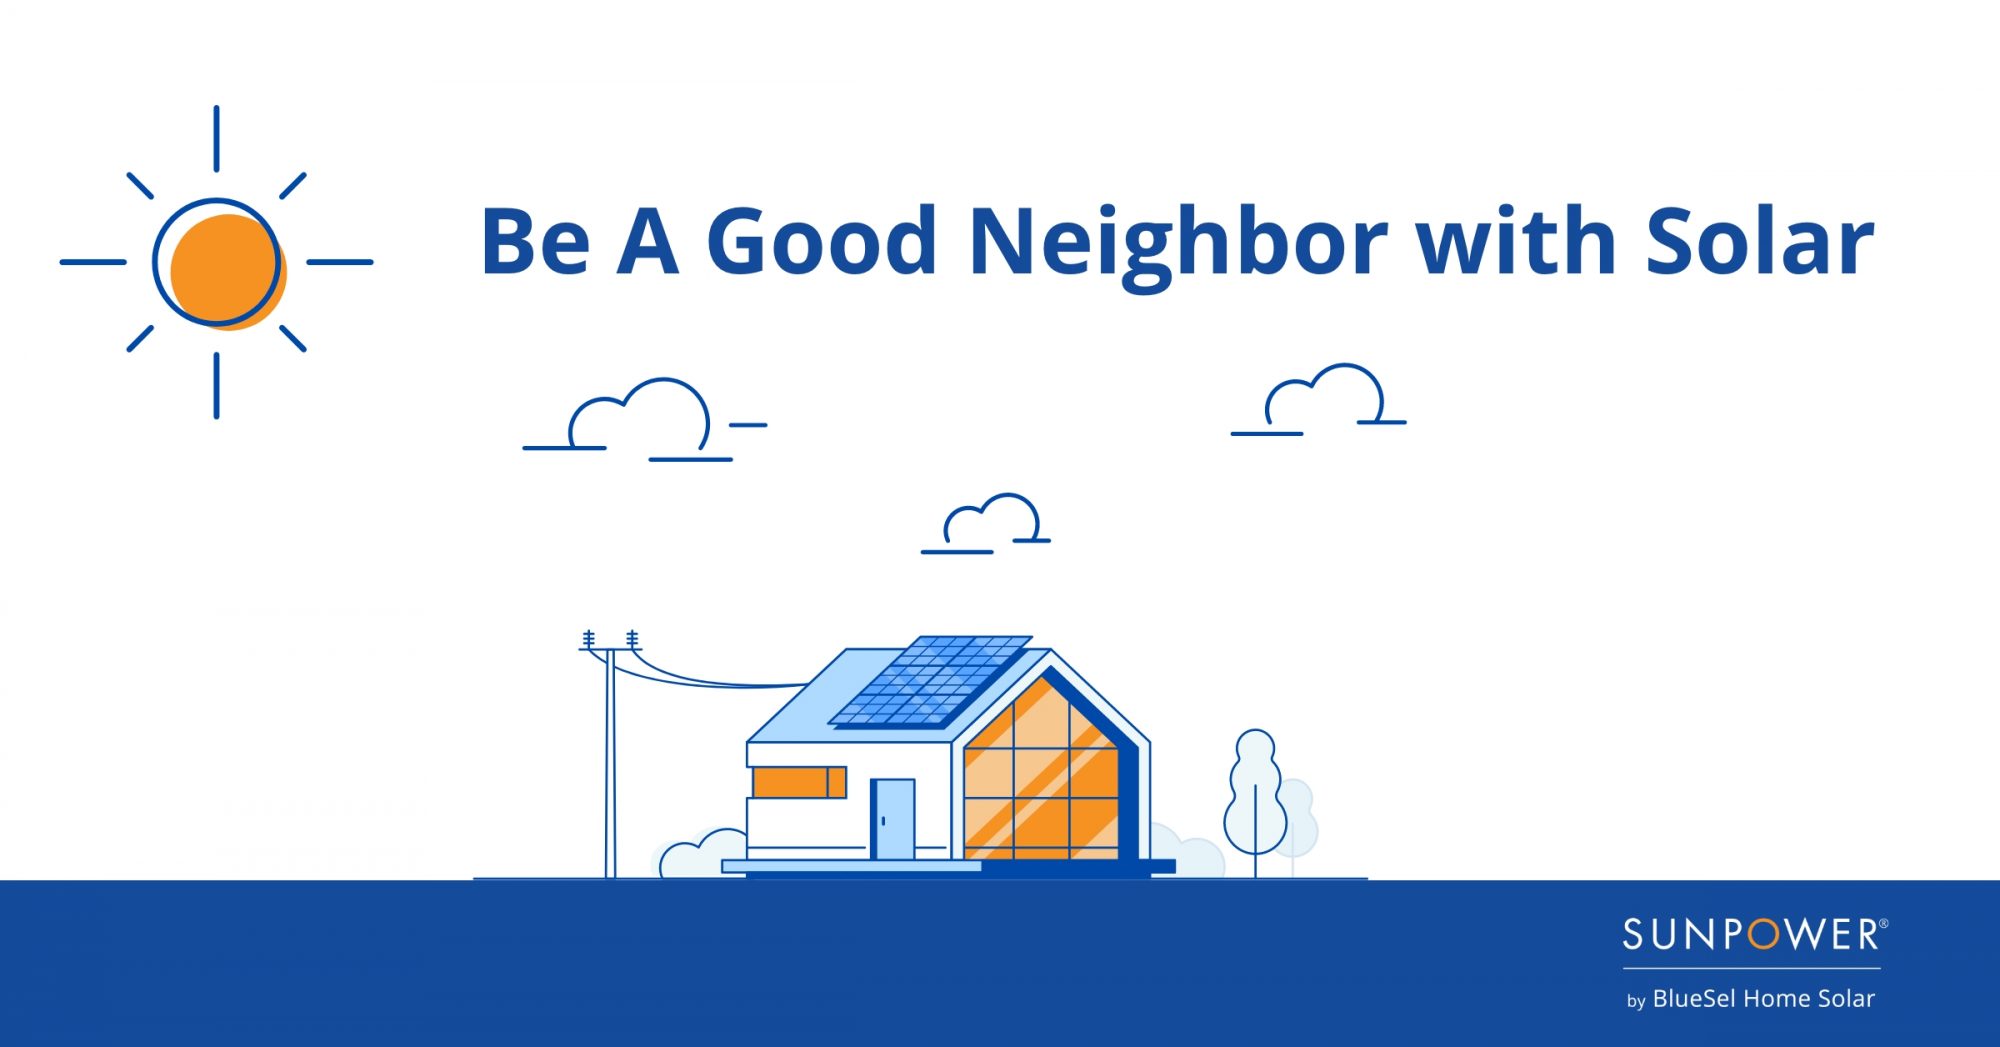 Blog title "Be A Good Neighbor with Solar" with an image of a house with solar panels on the roof